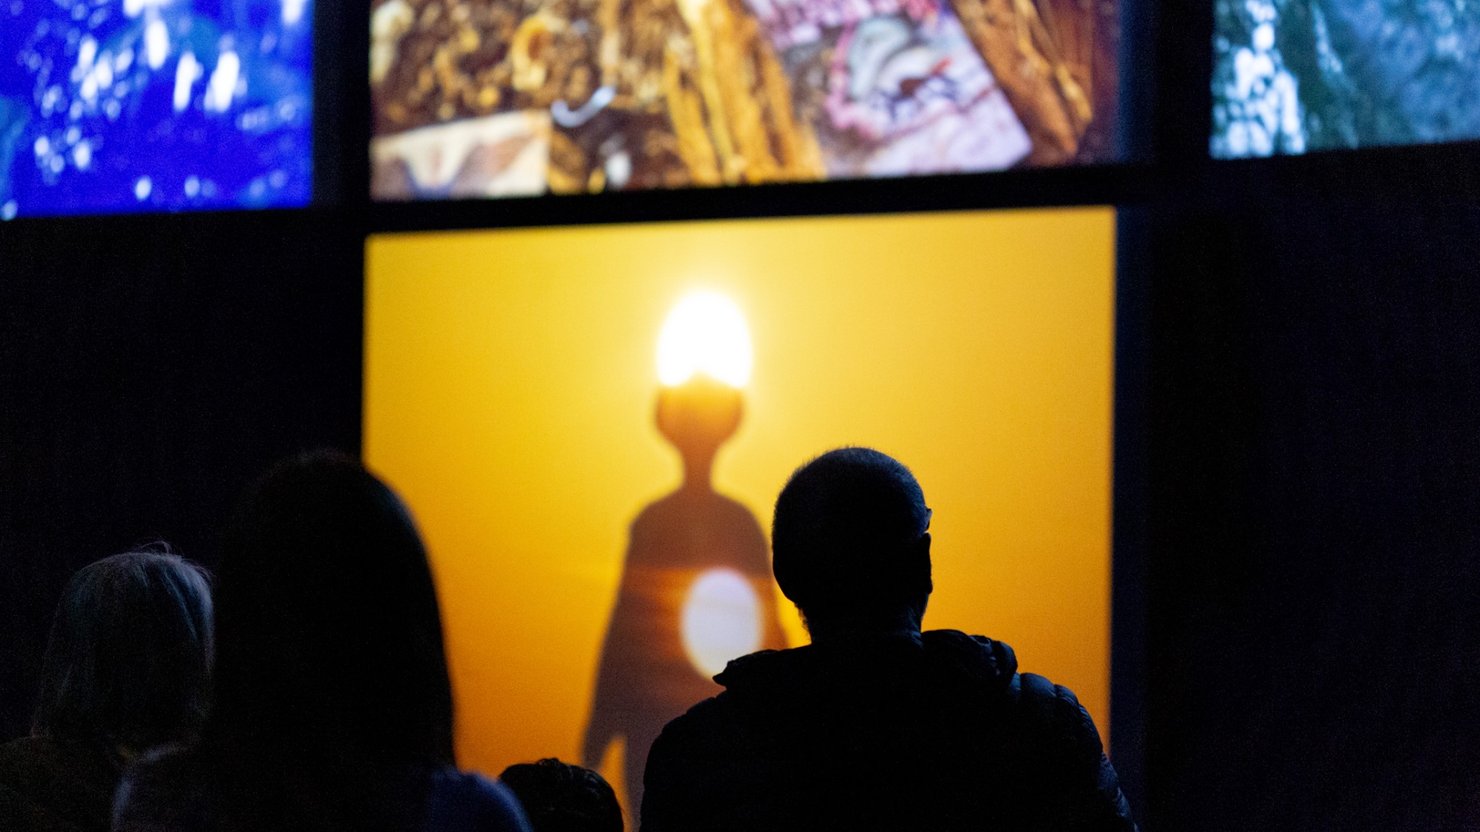 Audience watching film installation with screens showing a figure and sun